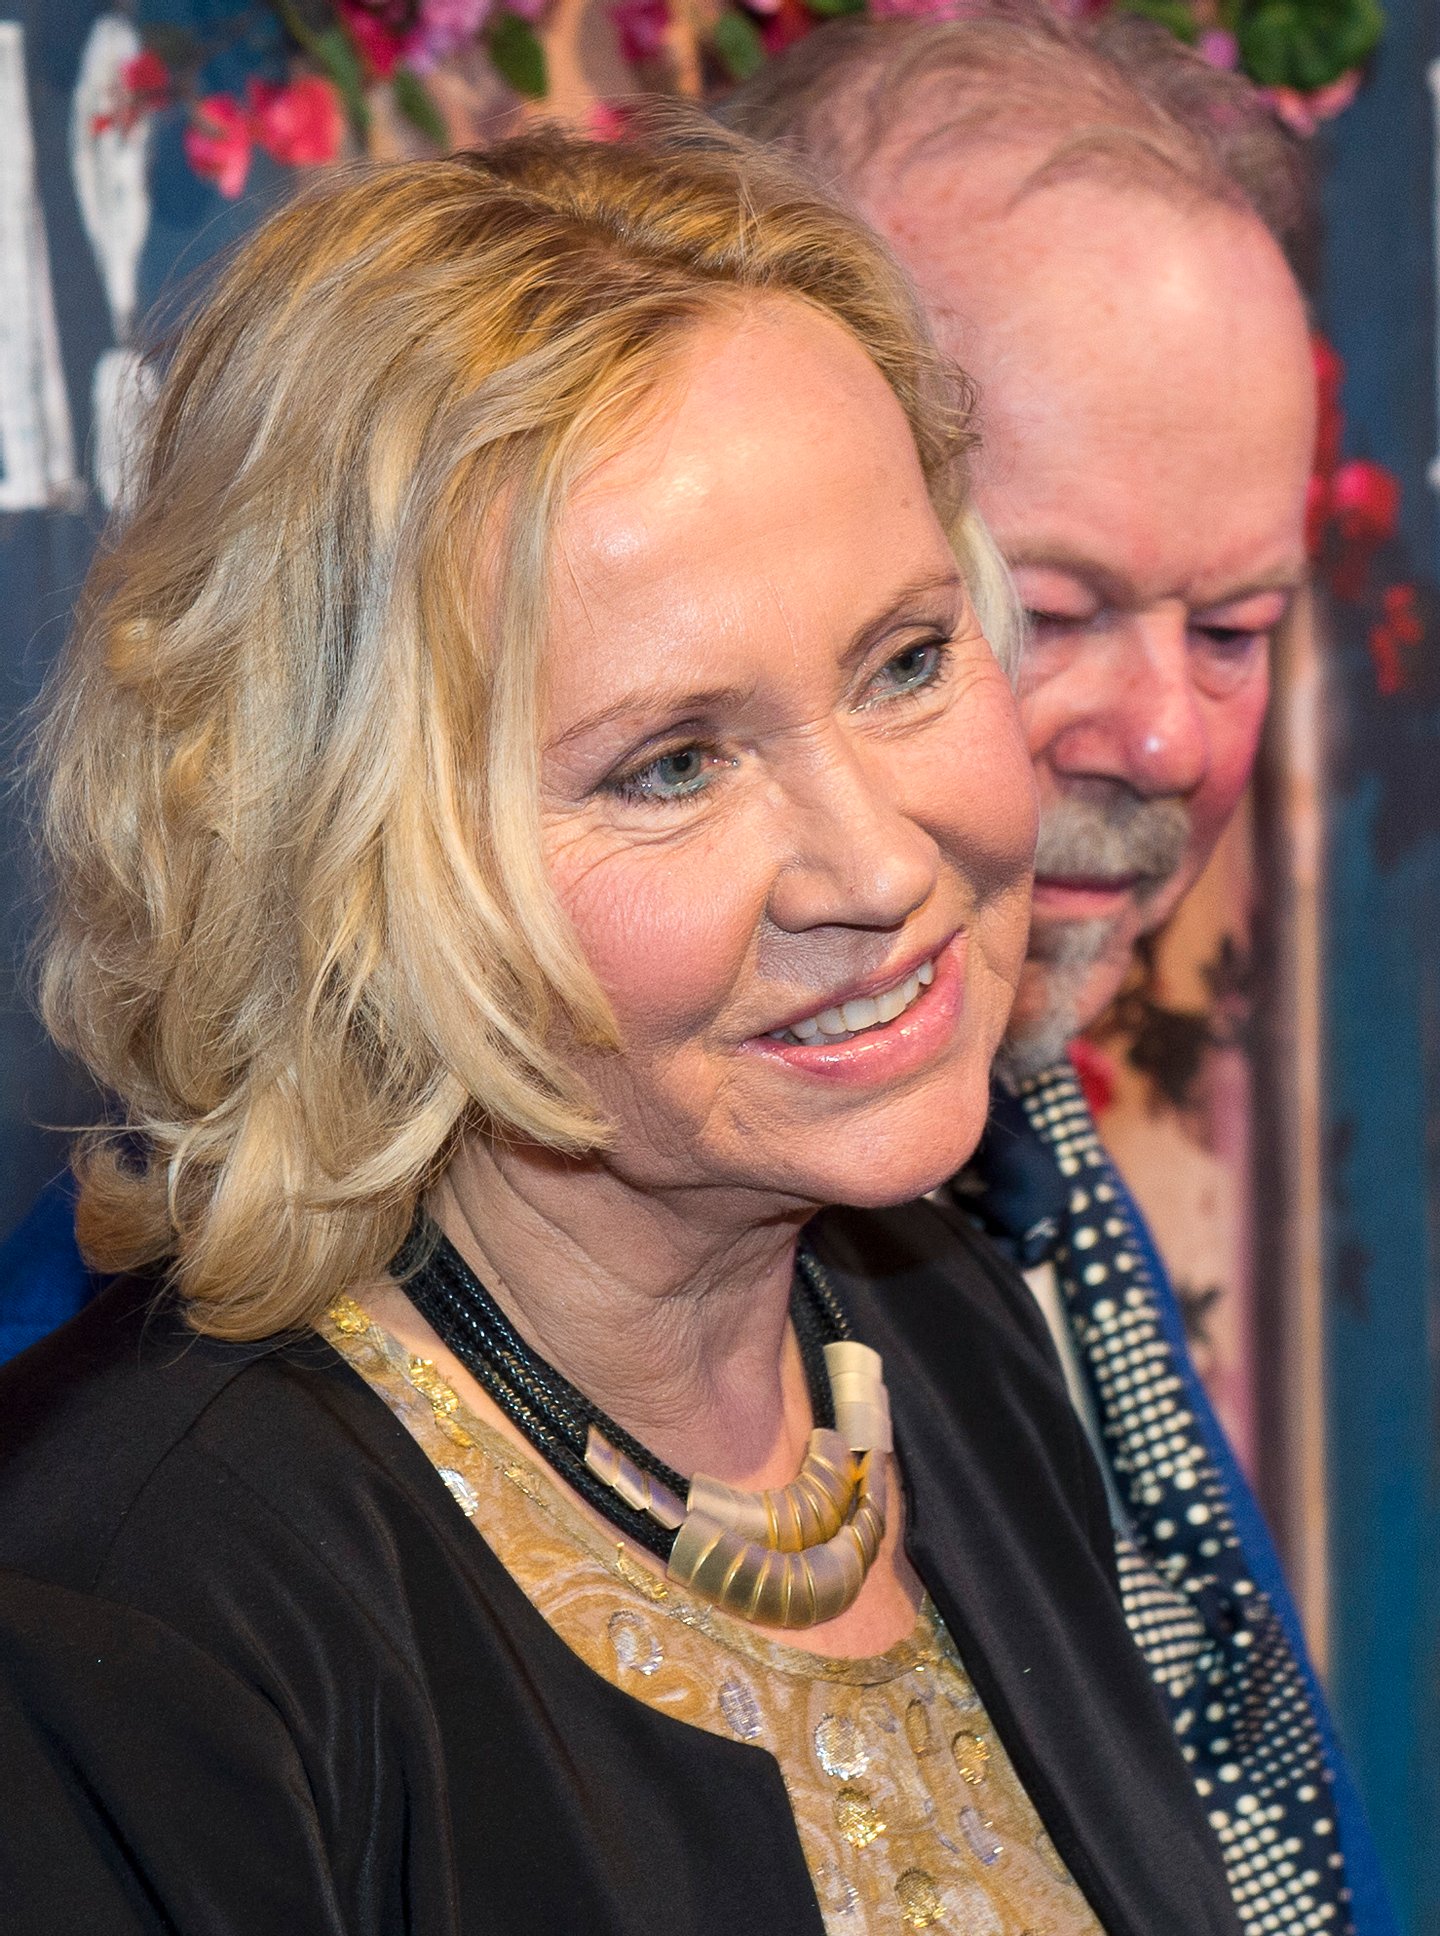 Agnetha Faltskog (L), member of Swedish disco group ABBA attends the opening of "Mamma Mia! The party", a new restaurant in Stockholm where people can eat while watching a show based on ABBA's songs on January 20, 2016 in Stockholm. / AFP / JONATHAN NACKSTRAND (Photo credit should read JONATHAN NACKSTRAND/AFP/Getty Images)